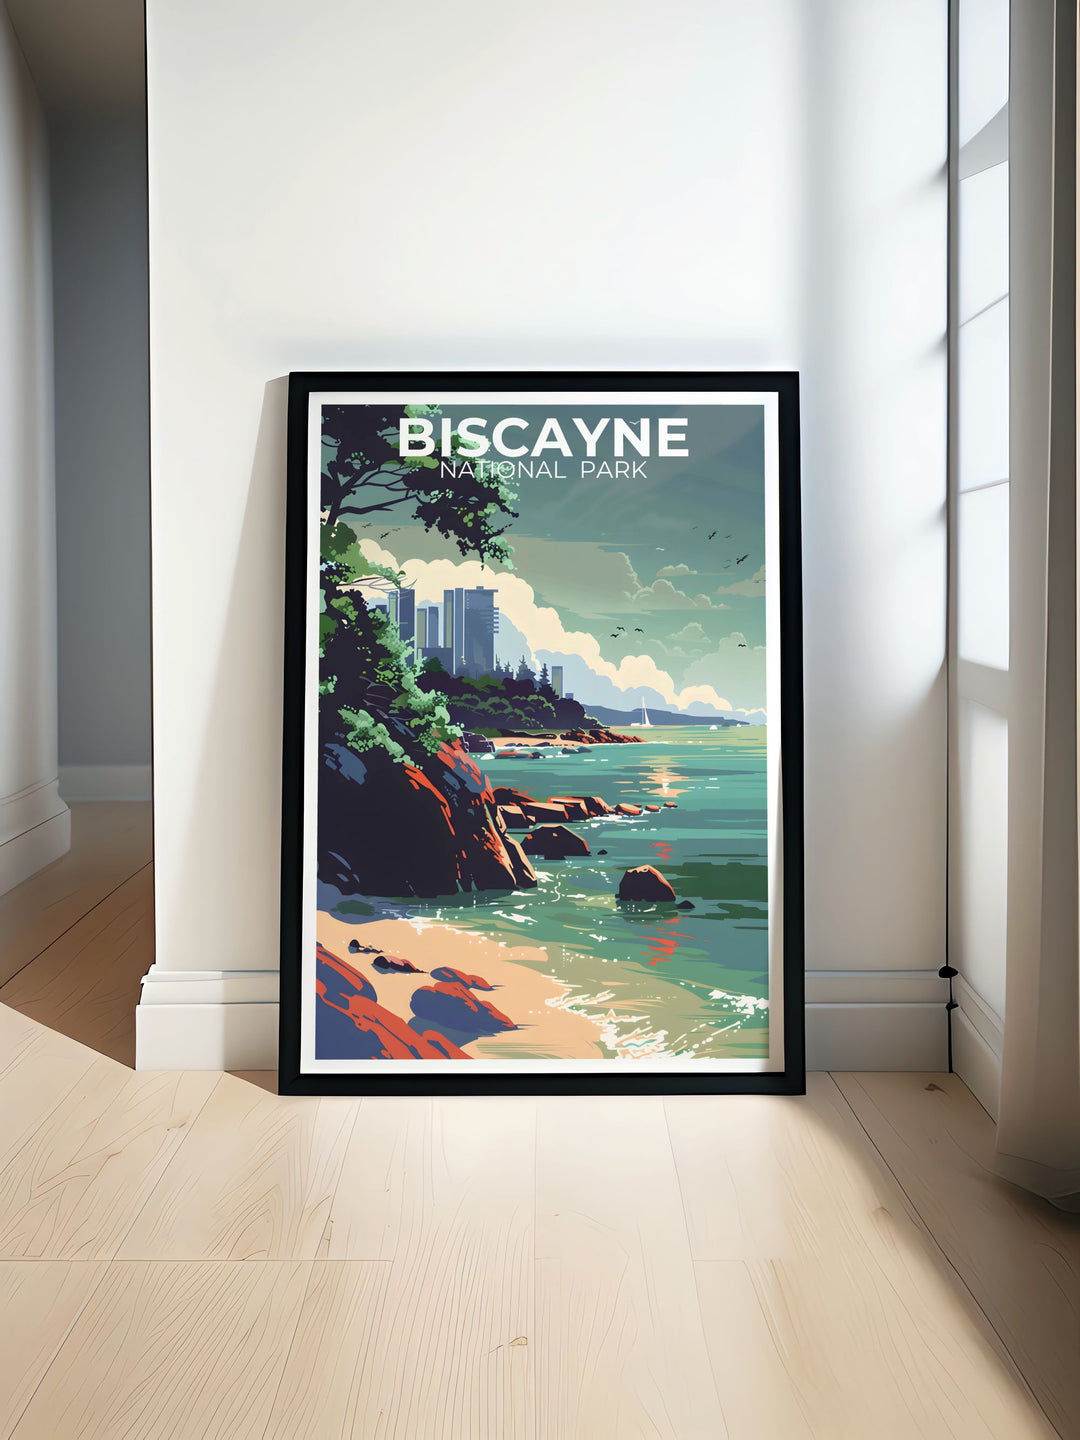 Stunning Biscayne National Park print highlighting the lush landscapes of Biscayne Bay Trail and the colorful coral reefs, ideal for nature enthusiasts and travel art lovers.